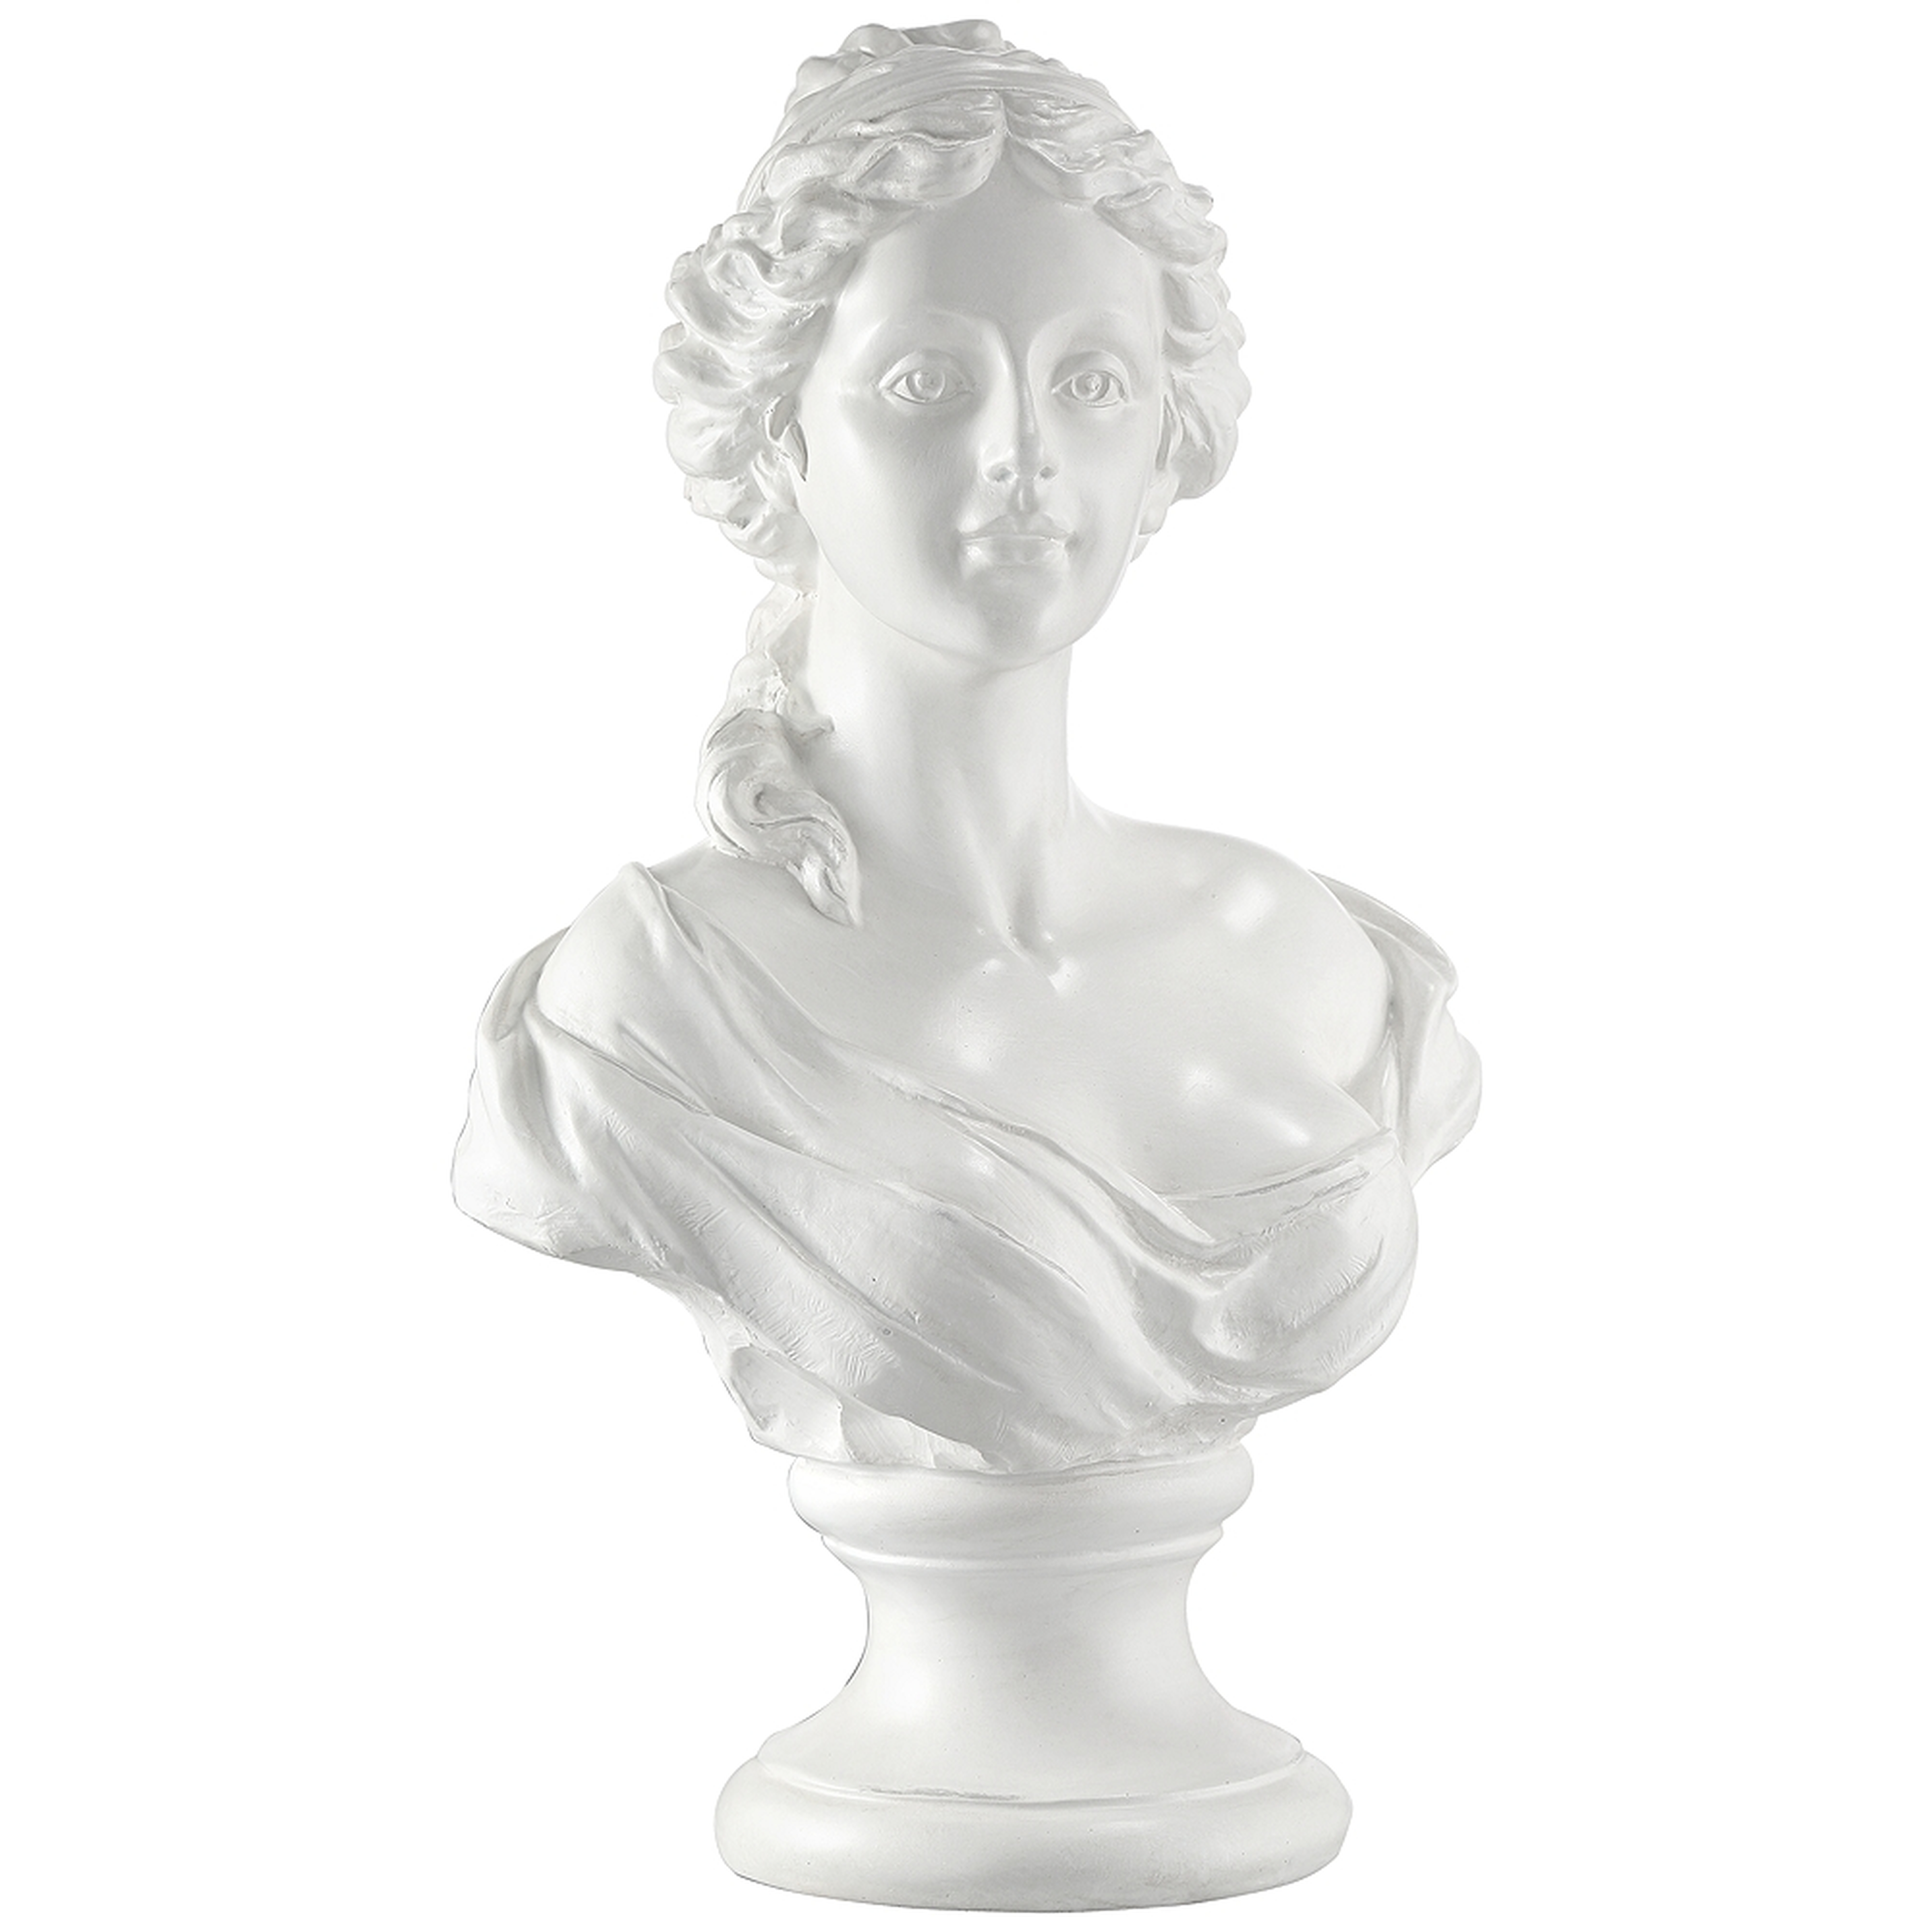 Classic Roman 16" High White Female Bust Statue - Style # 71T18 - Lamps Plus